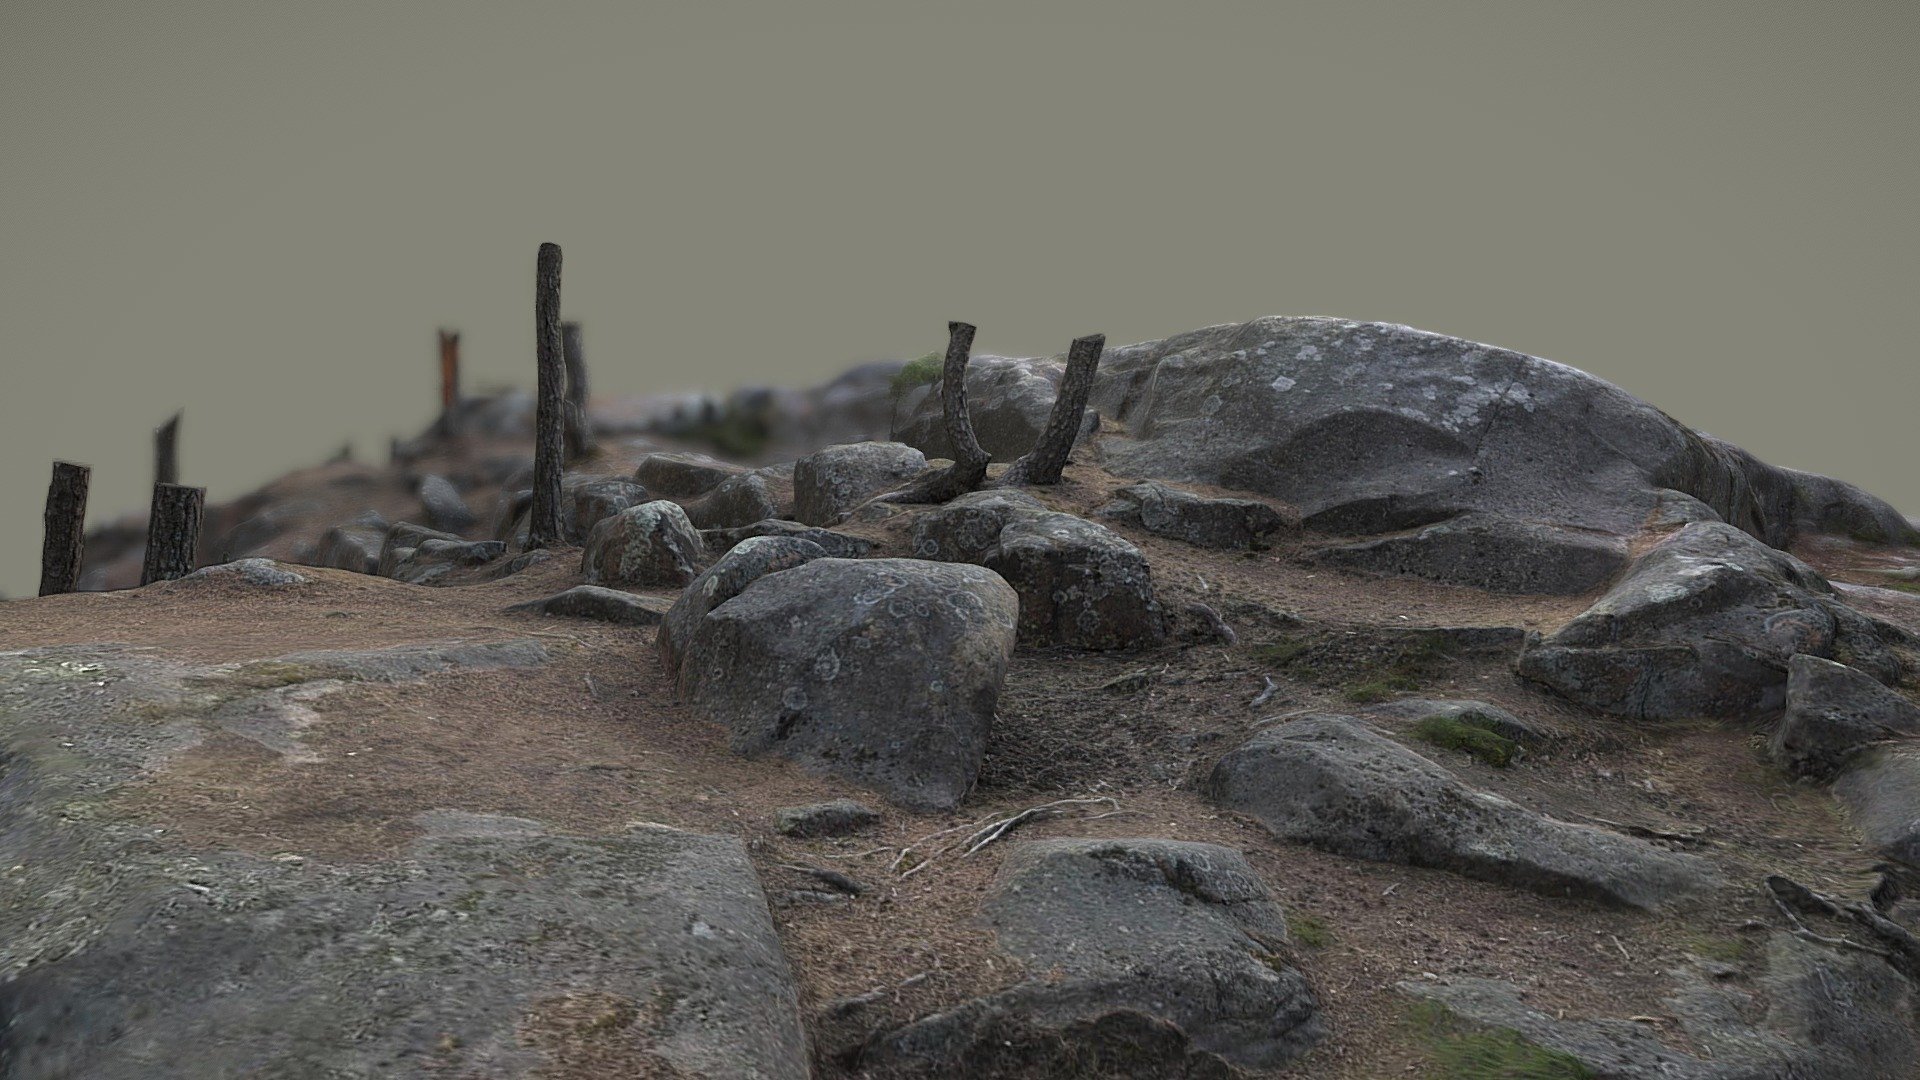 Another rocky terrain scan.

Photos taken with A7RIV + Parrot Anafi 3d model